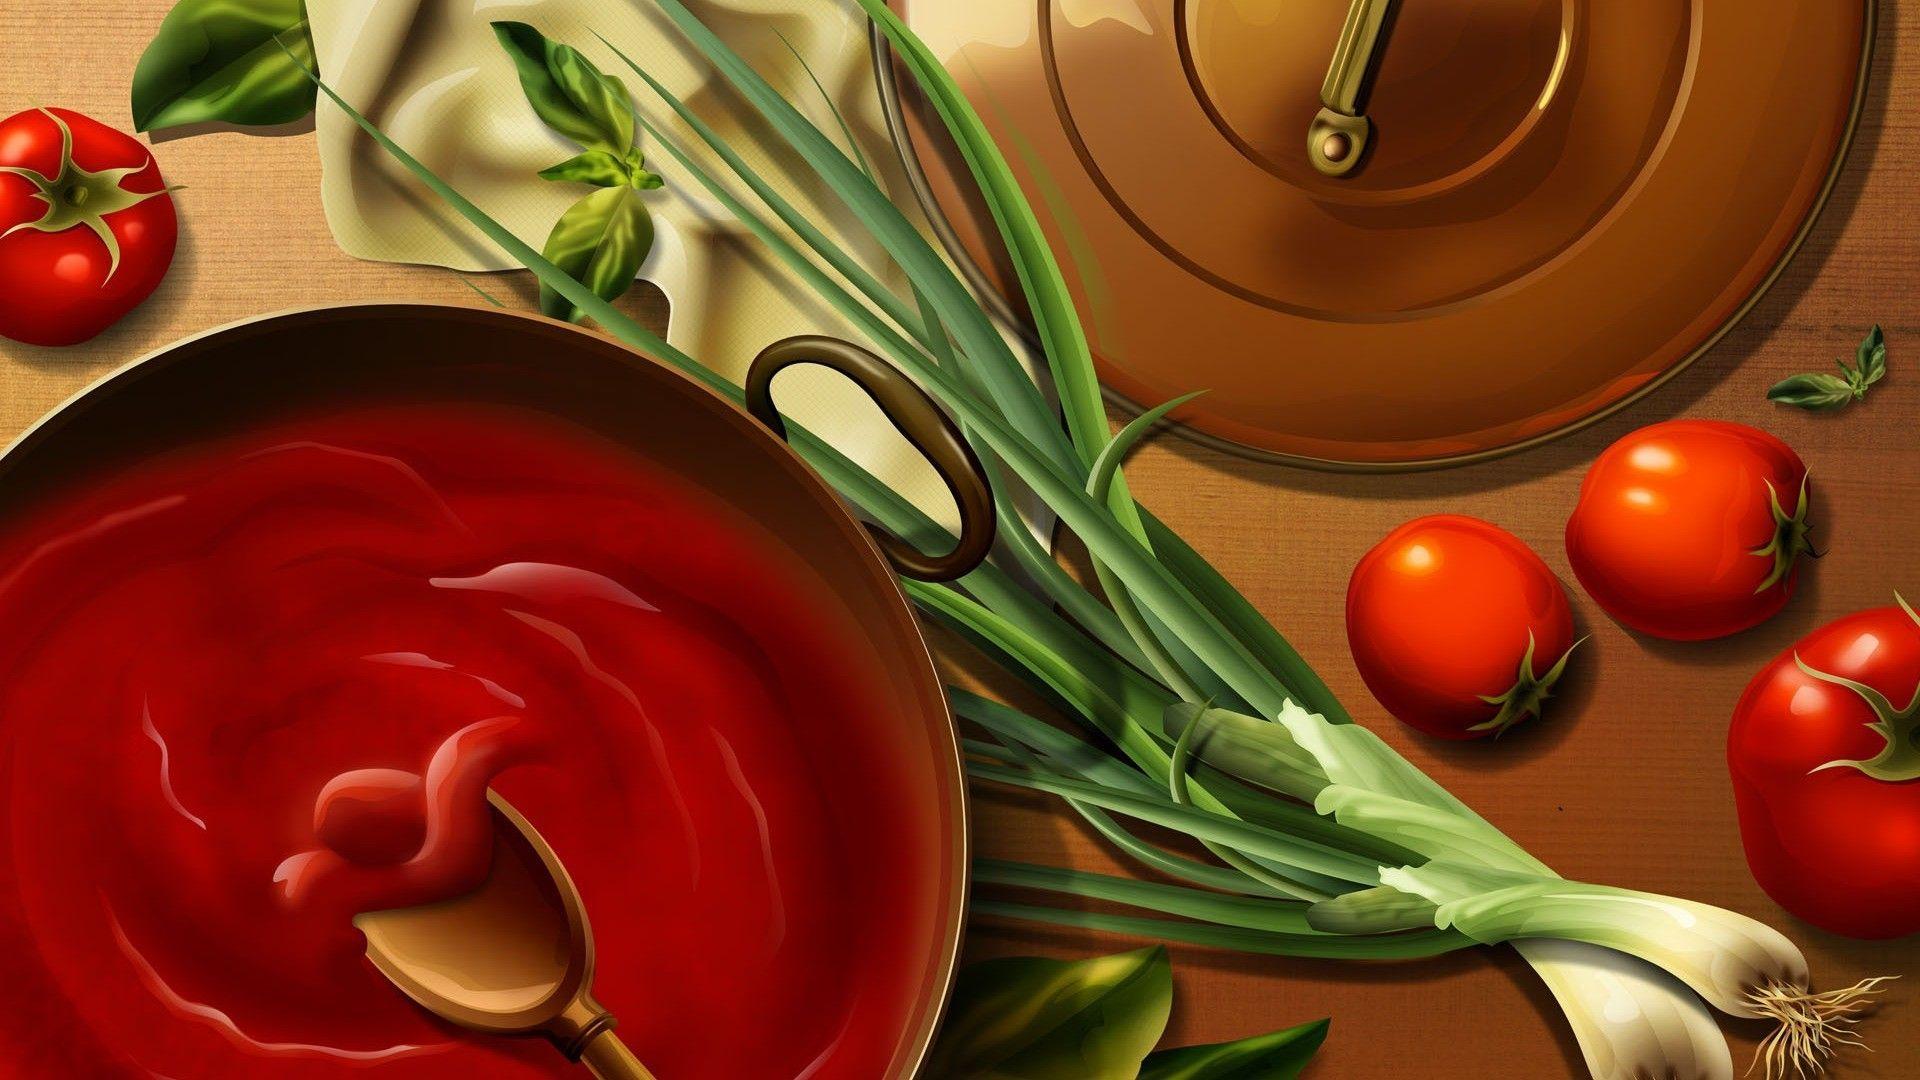 10+ Cooking HD Wallpapers and Backgrounds